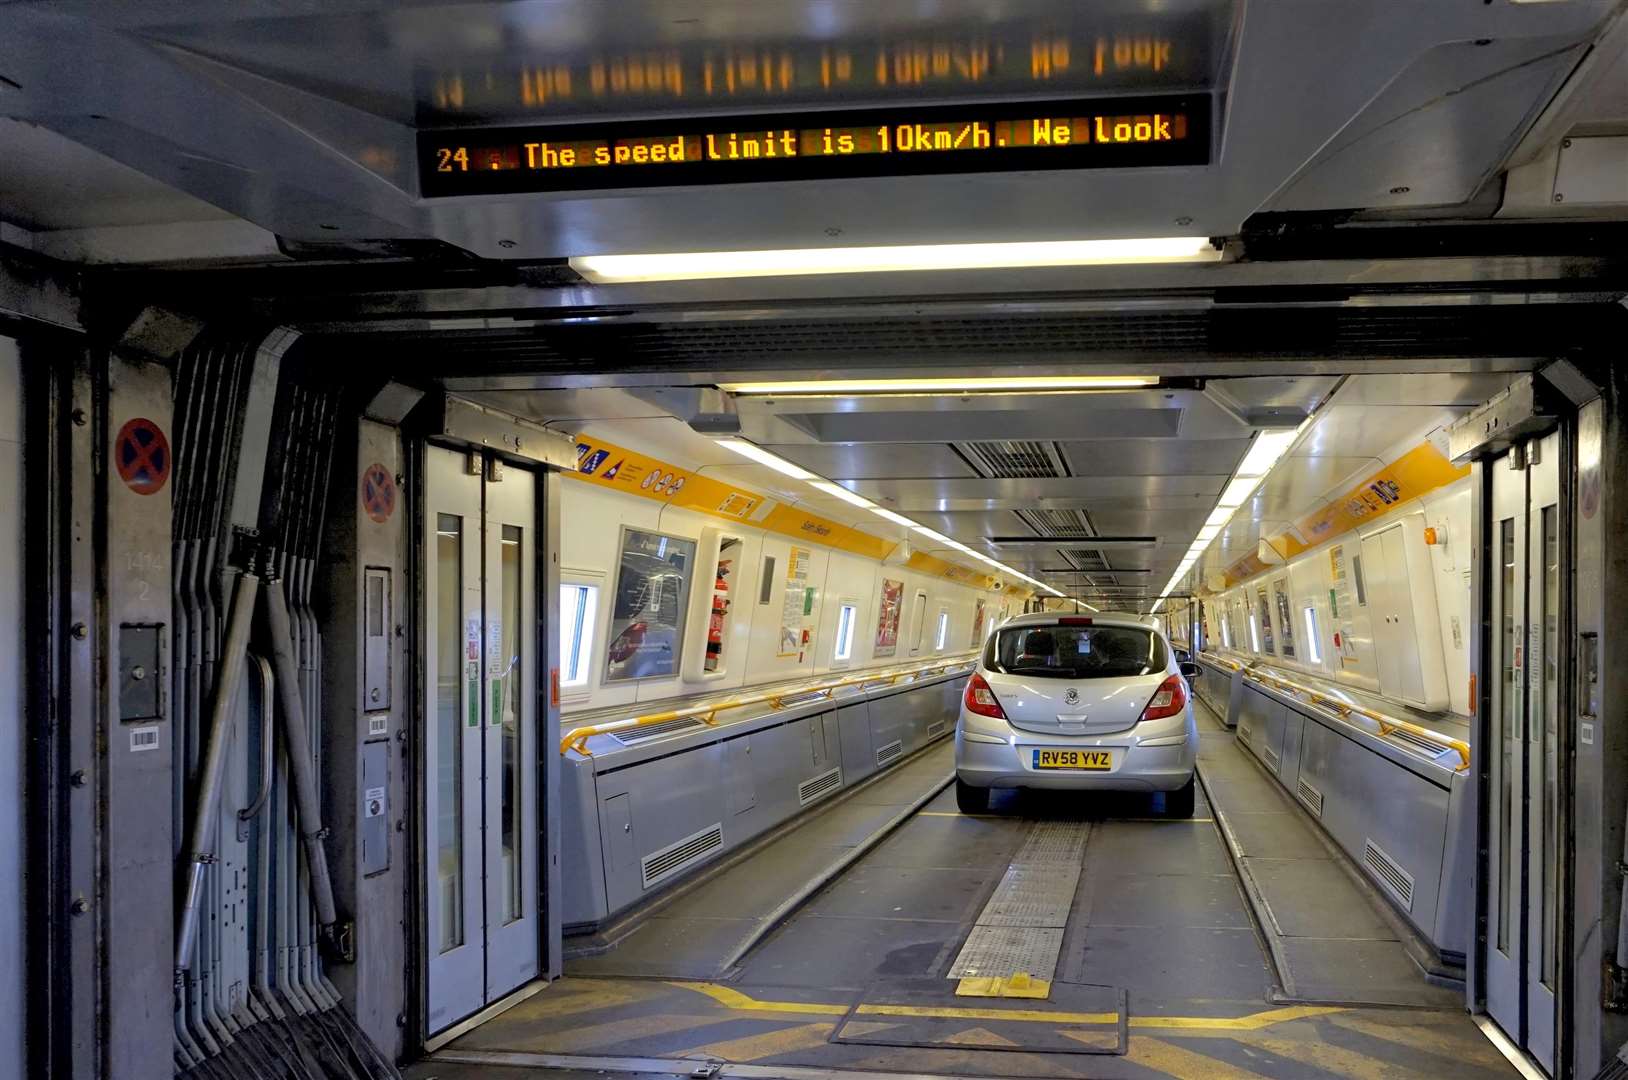 A car enters a Eurotunnel carriage at Folkestone on its way to France